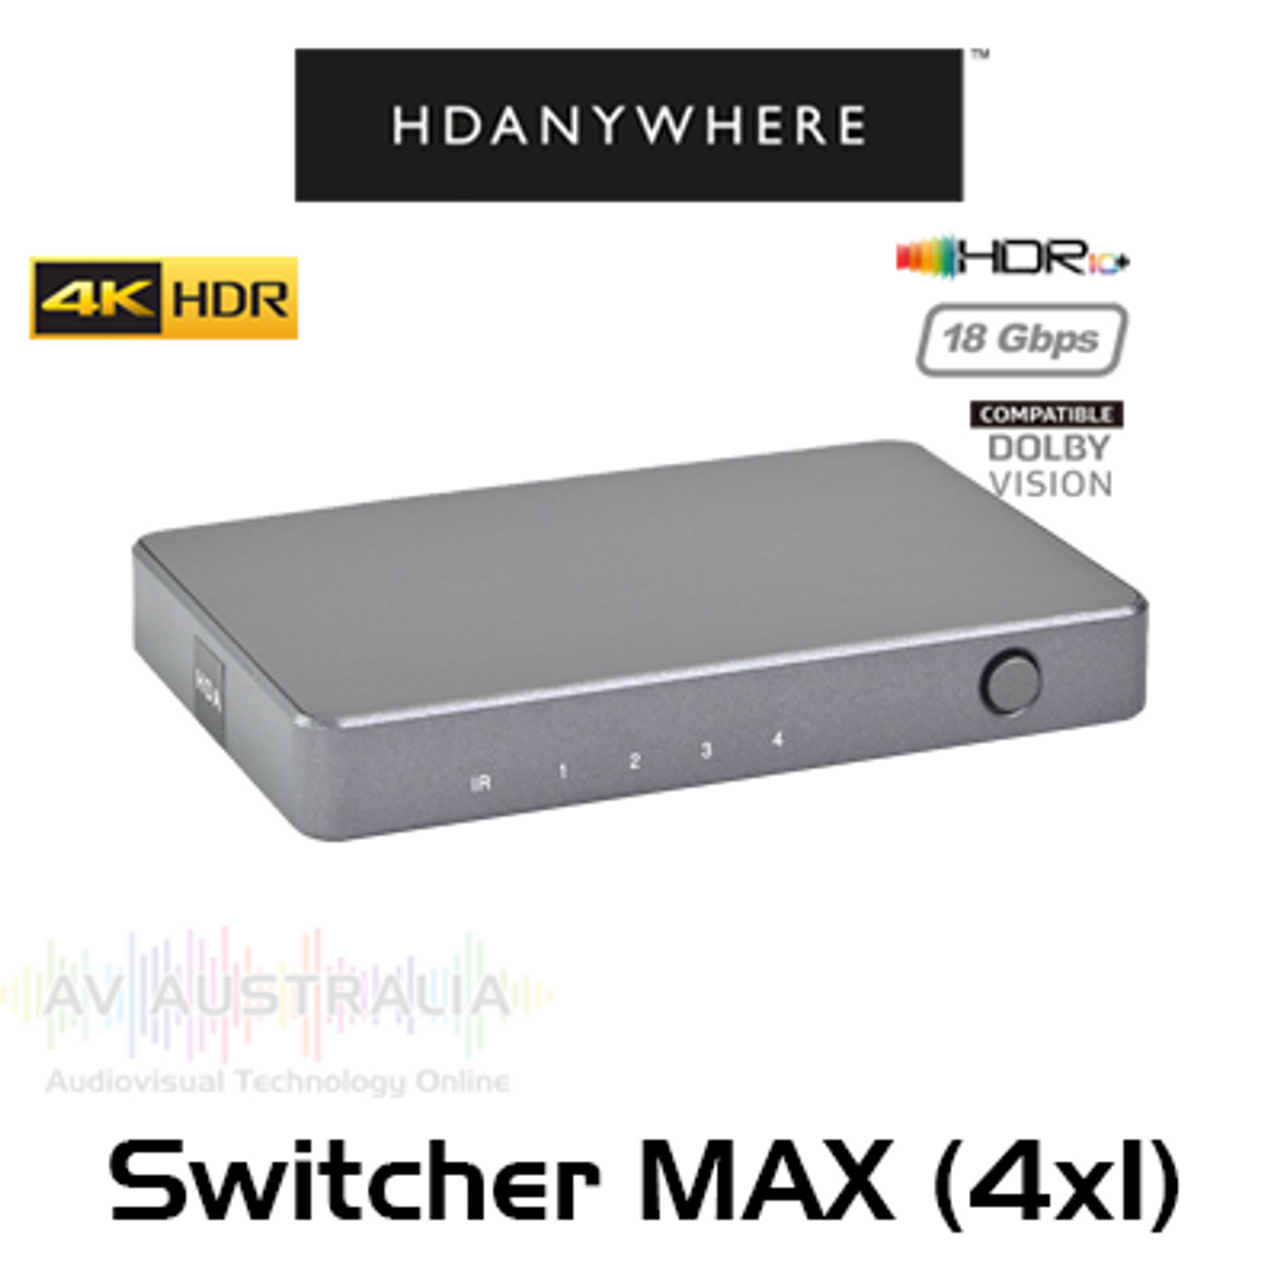 HDAnywhere Switcher Max 4x1 4K HDR HDMI 2.0 Switcher